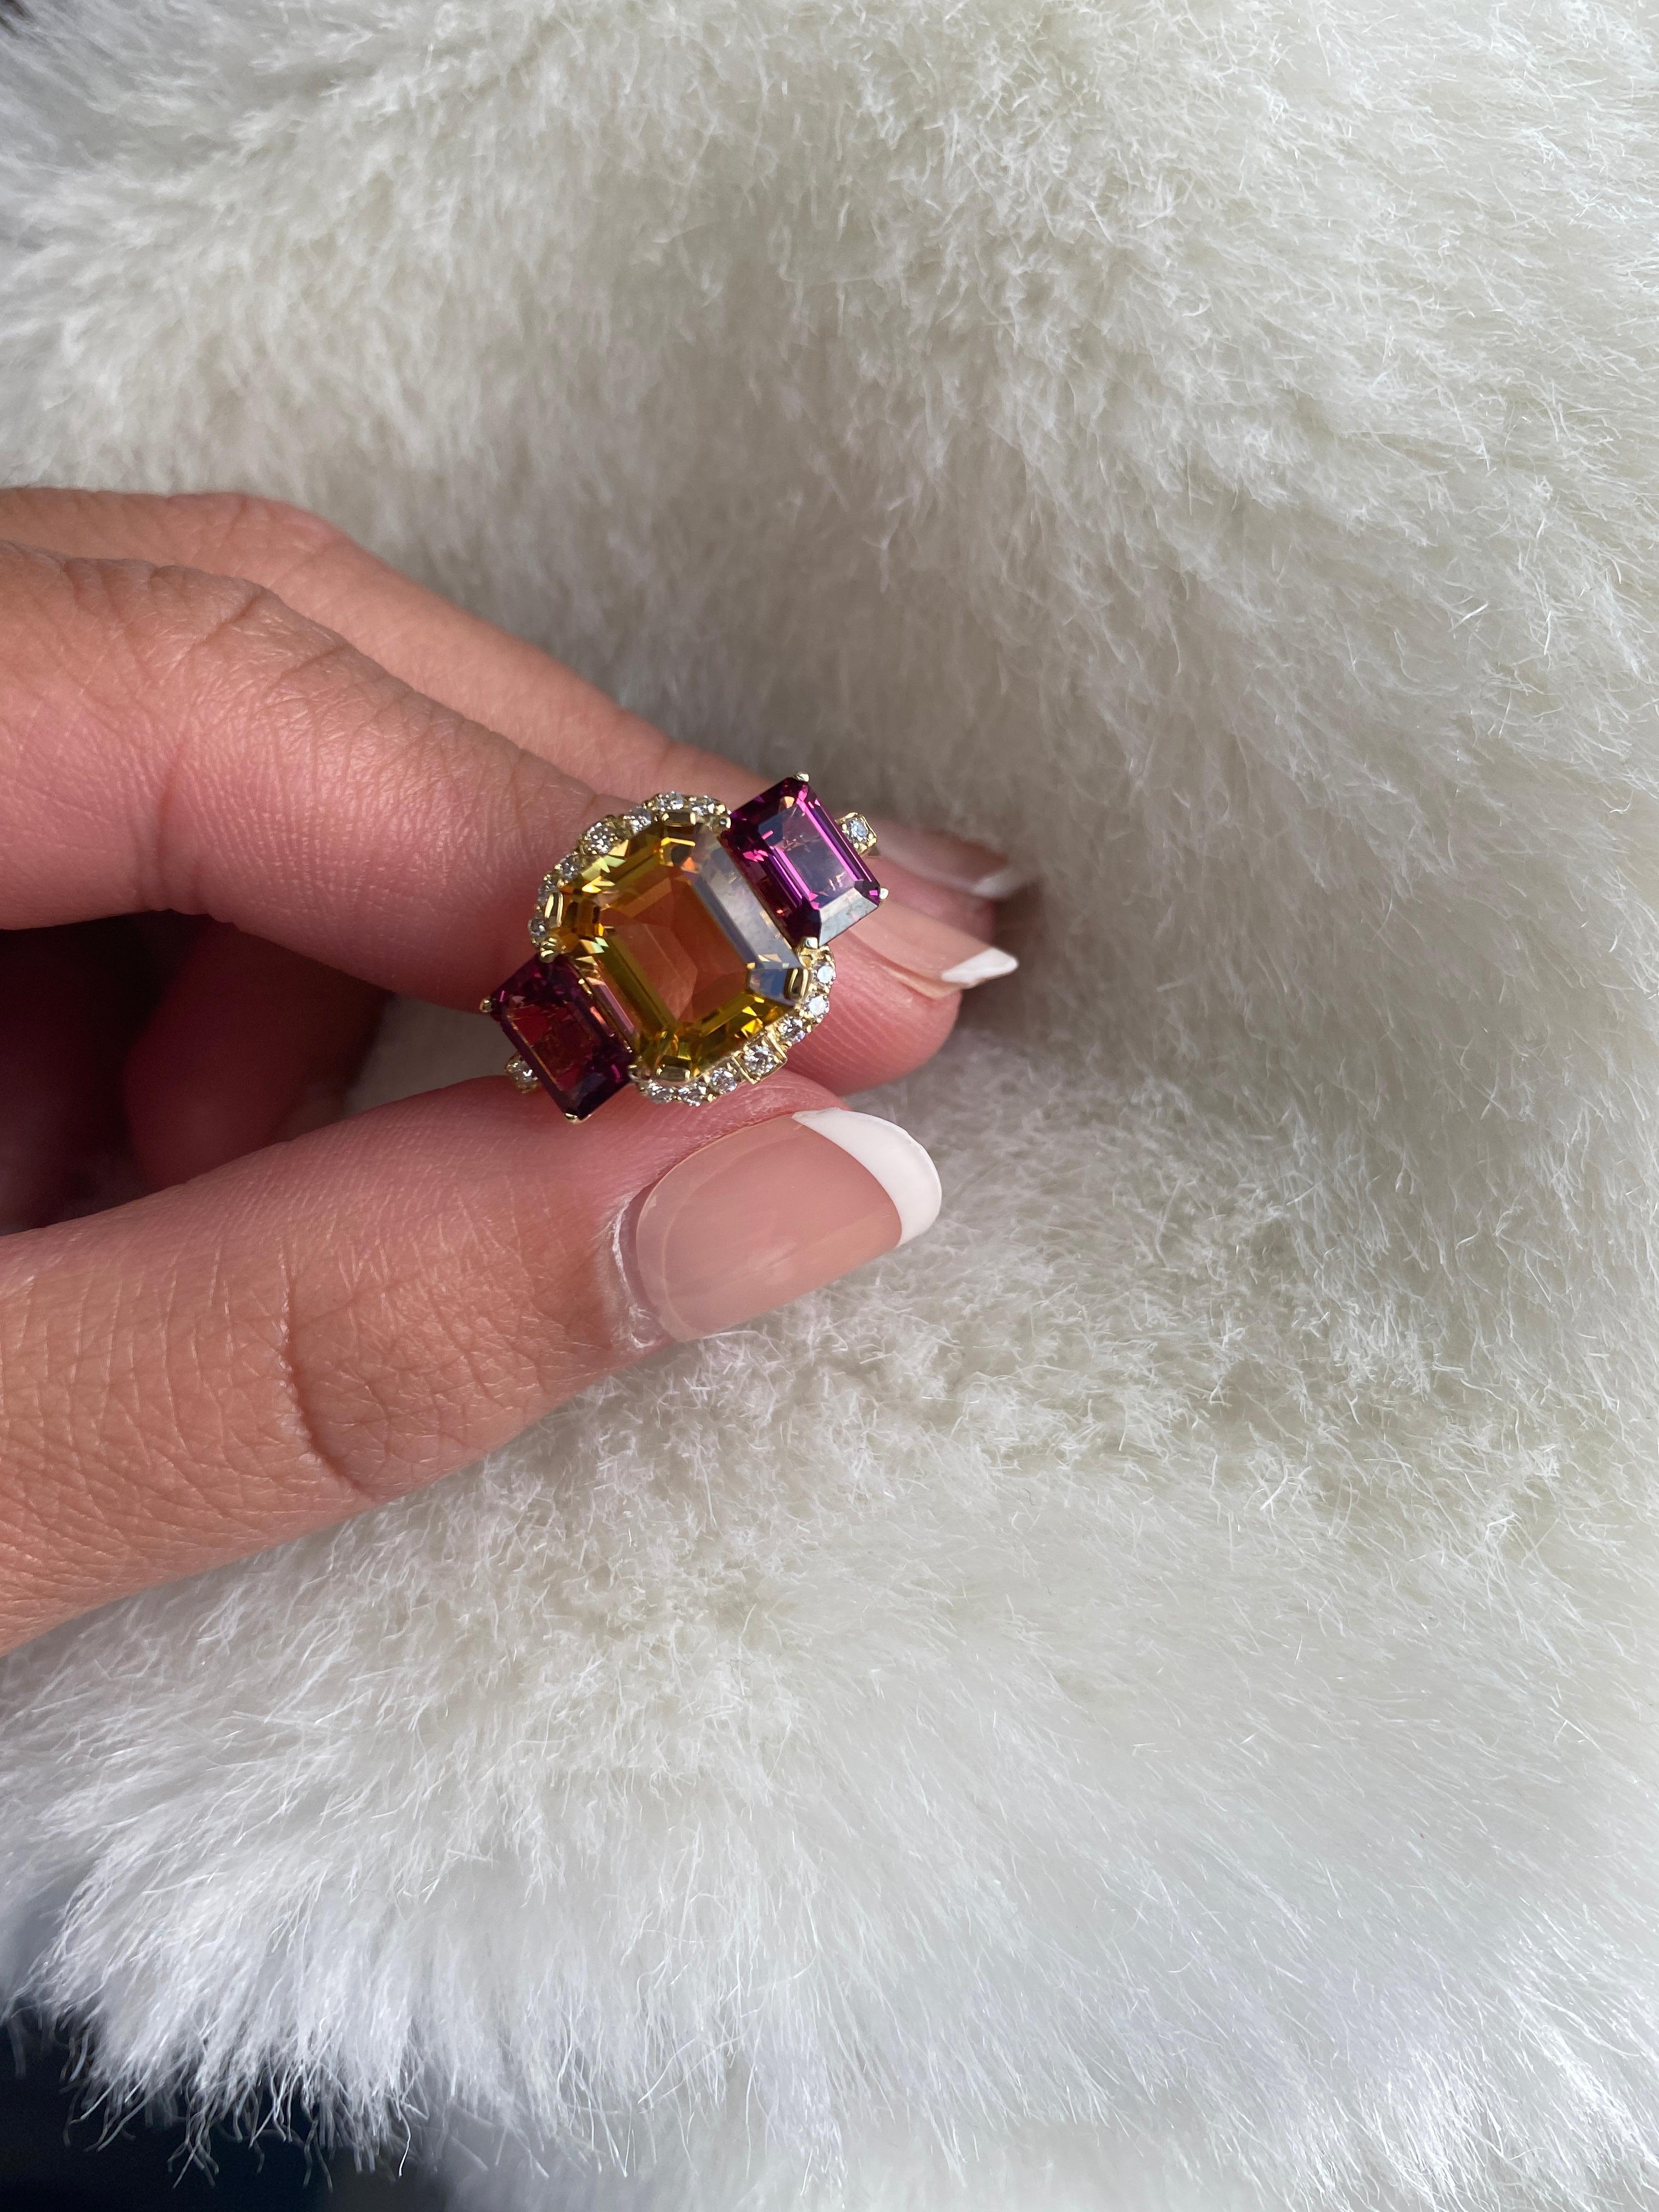 A perfect combination of Citrine and Garnet is this 3 Stone Emerald Cut Ring with Diamonds set in 18K Yellow Gold. From our popular 'Gossip' Collection, this piece carries a hint of shock value.

* Stone Size: 10 x 8 - 7 x 5 mm
* Gemstone: 100%